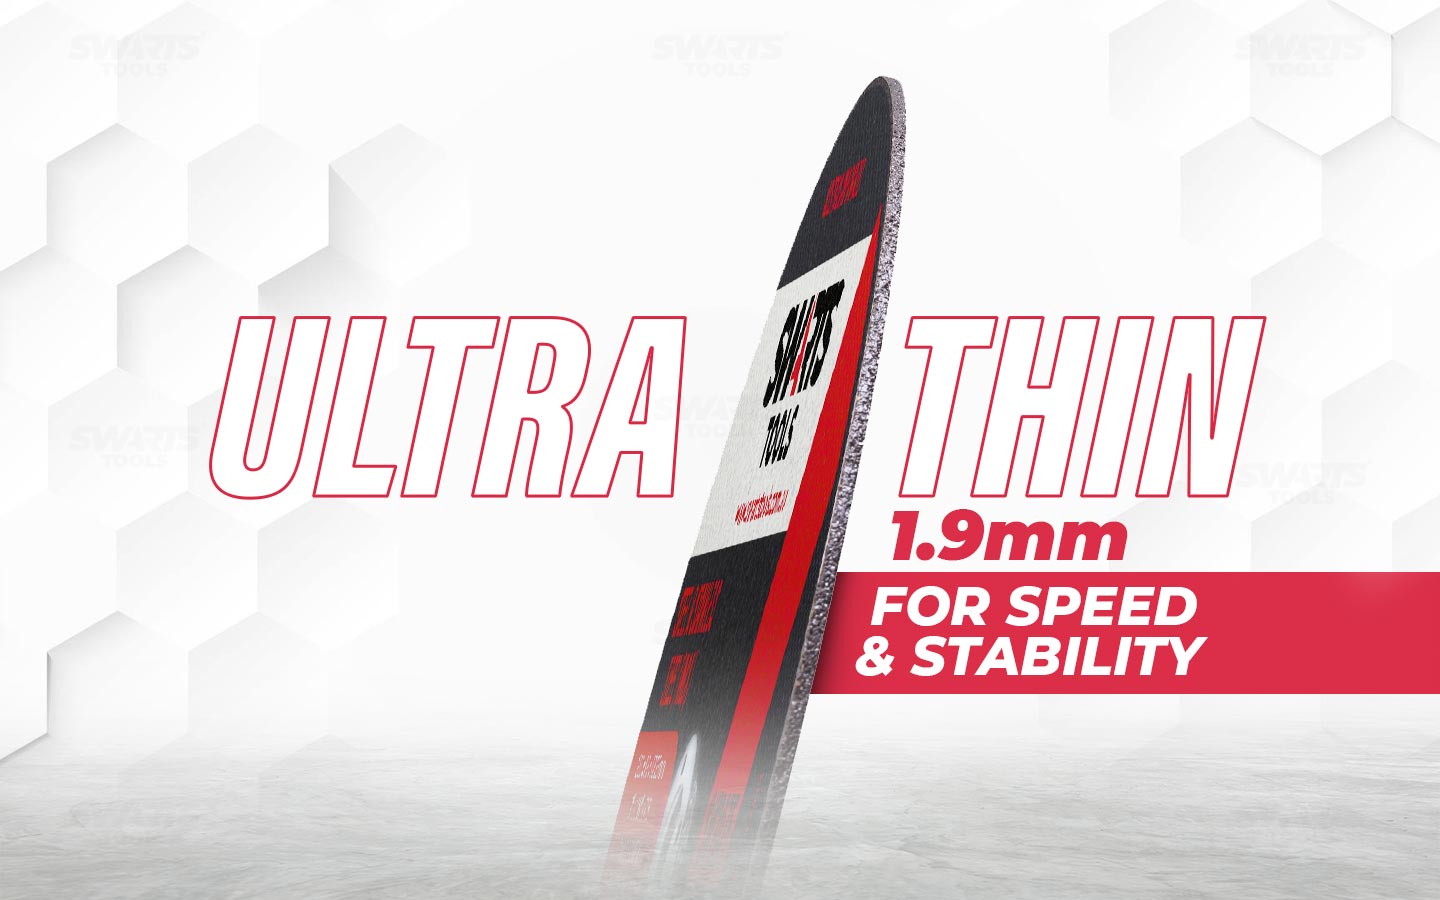 Ultra thin 1.9mm for speed & stability